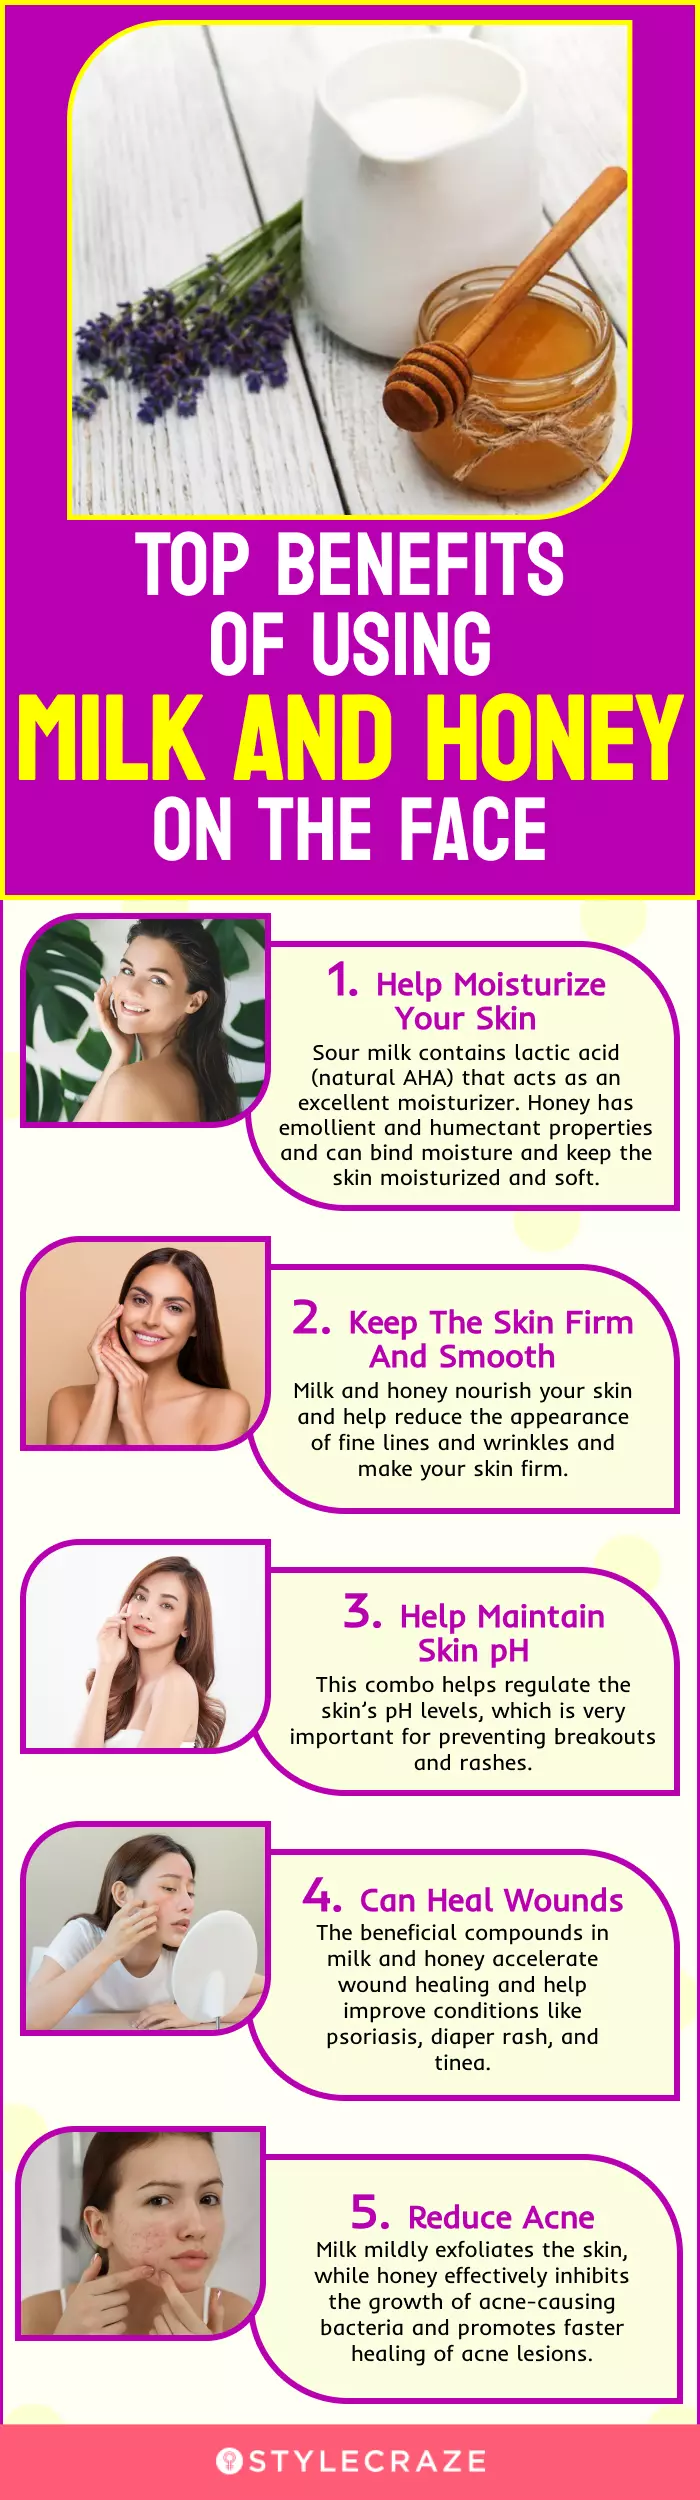 top benefits of using milk and honey for face (infographic)